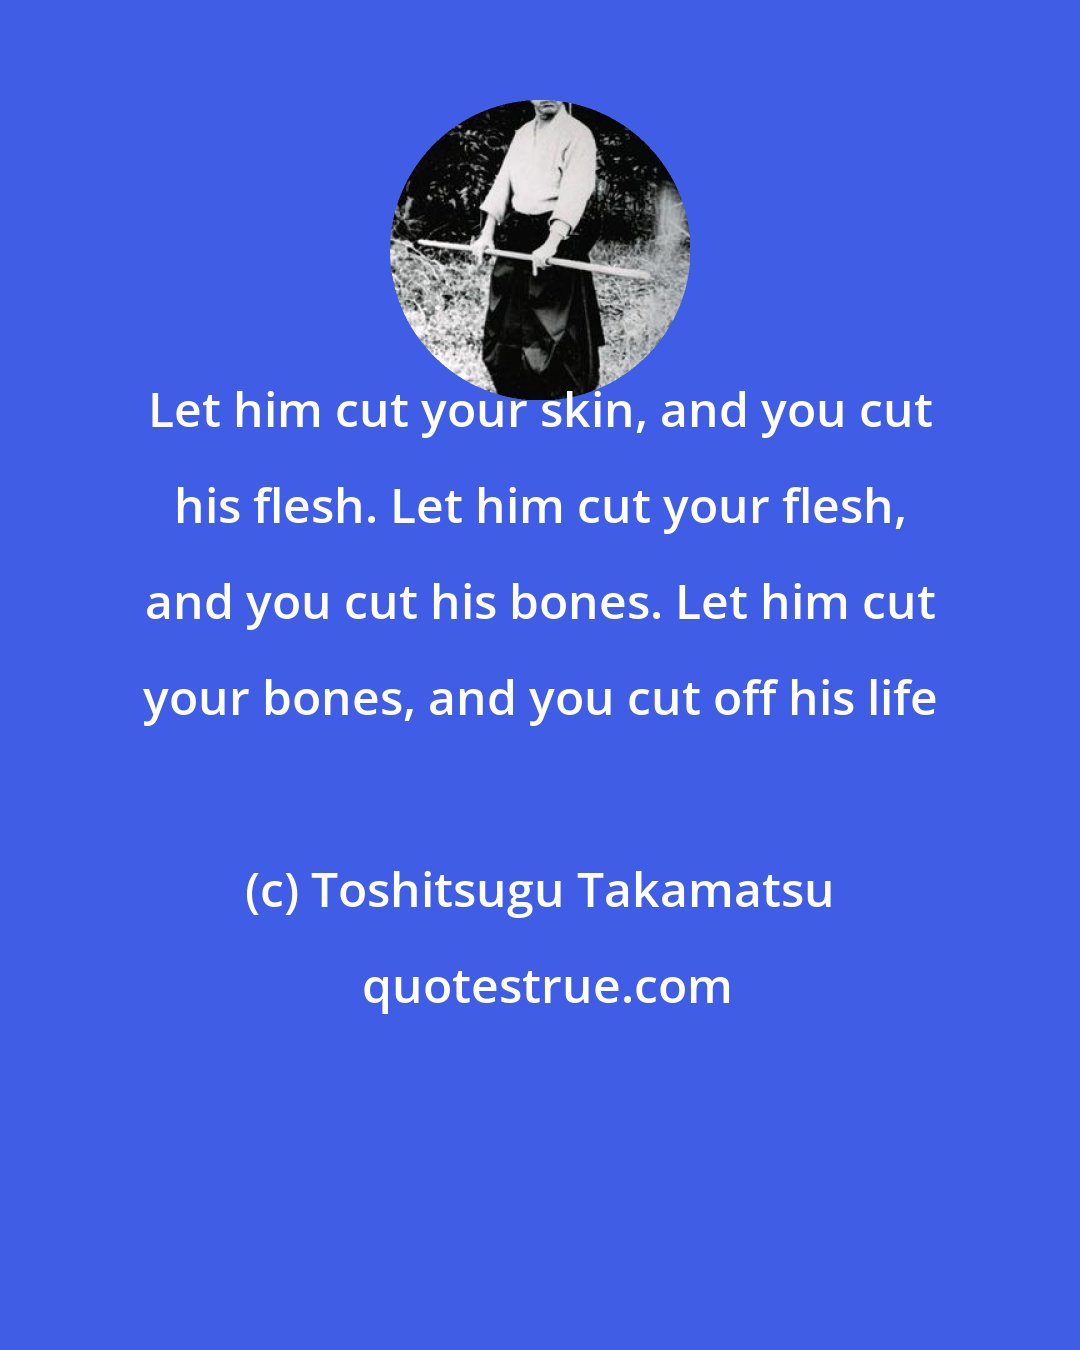 Toshitsugu Takamatsu: Let him cut your skin, and you cut his flesh. Let him cut your flesh, and you cut his bones. Let him cut your bones, and you cut off his life